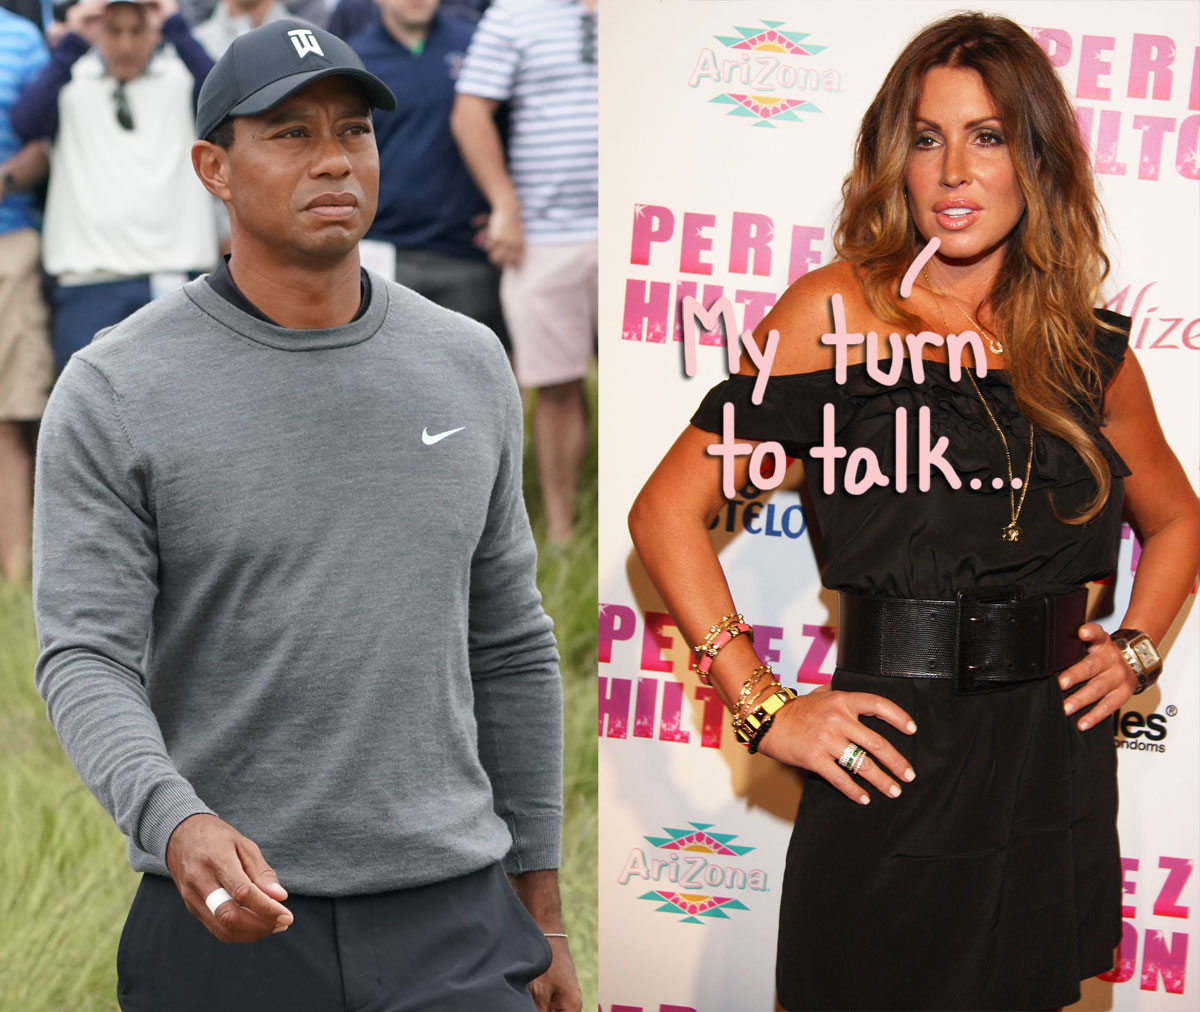 Tiger Woods Mistress Reveals His Last Text To Her In Upcoming Tell-All Documentary, And HOO BOY! image photo